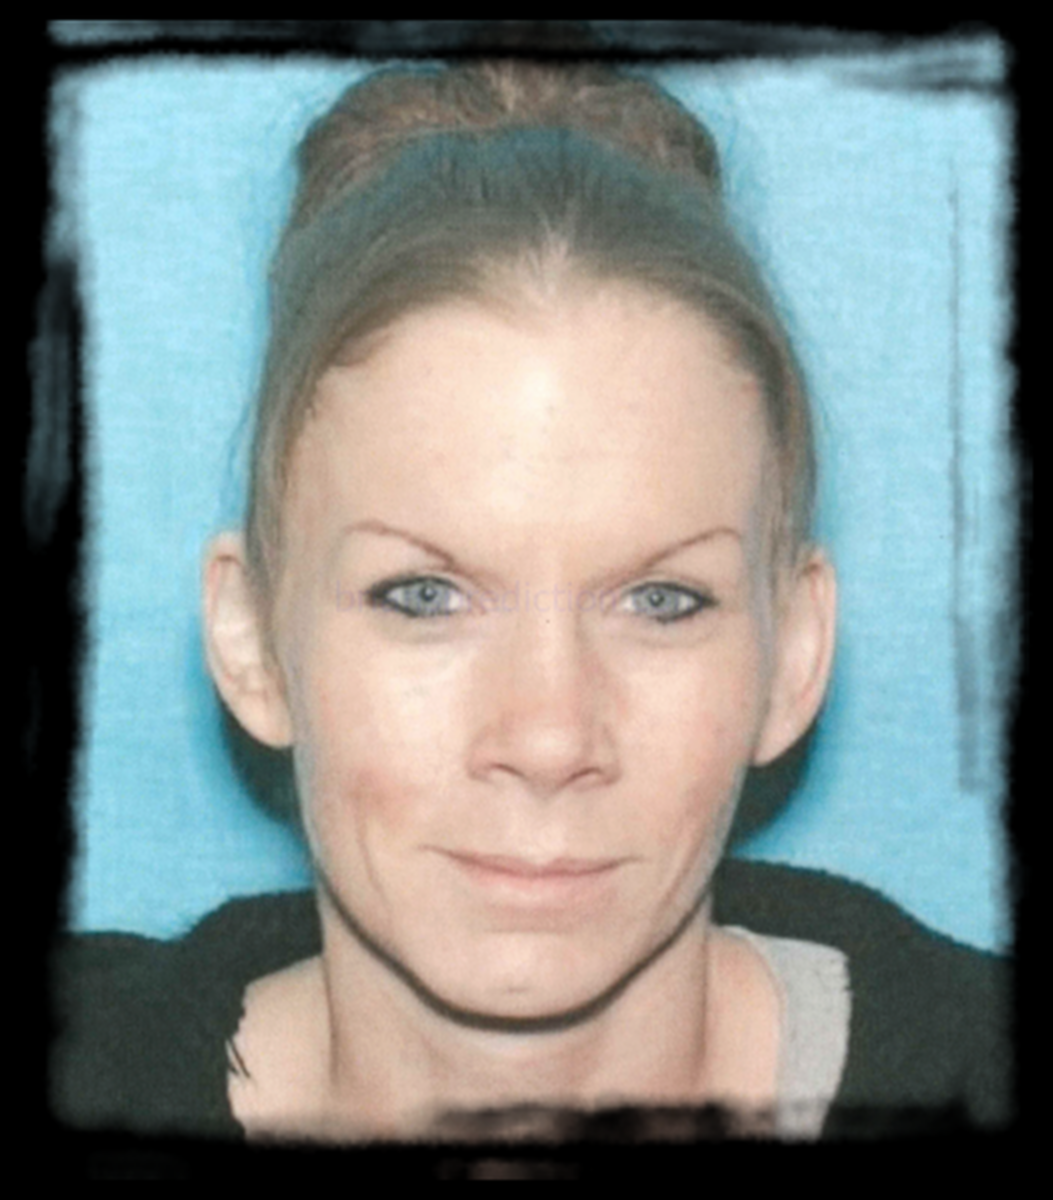 MISTY-CAIN MISSING WOMAN FOUND BY PSYCHIC BRIAN LADD~0
MISTY-CAIN MISSING WOMAN FOUND BY PSYCHIC BRIAN LADD~0
